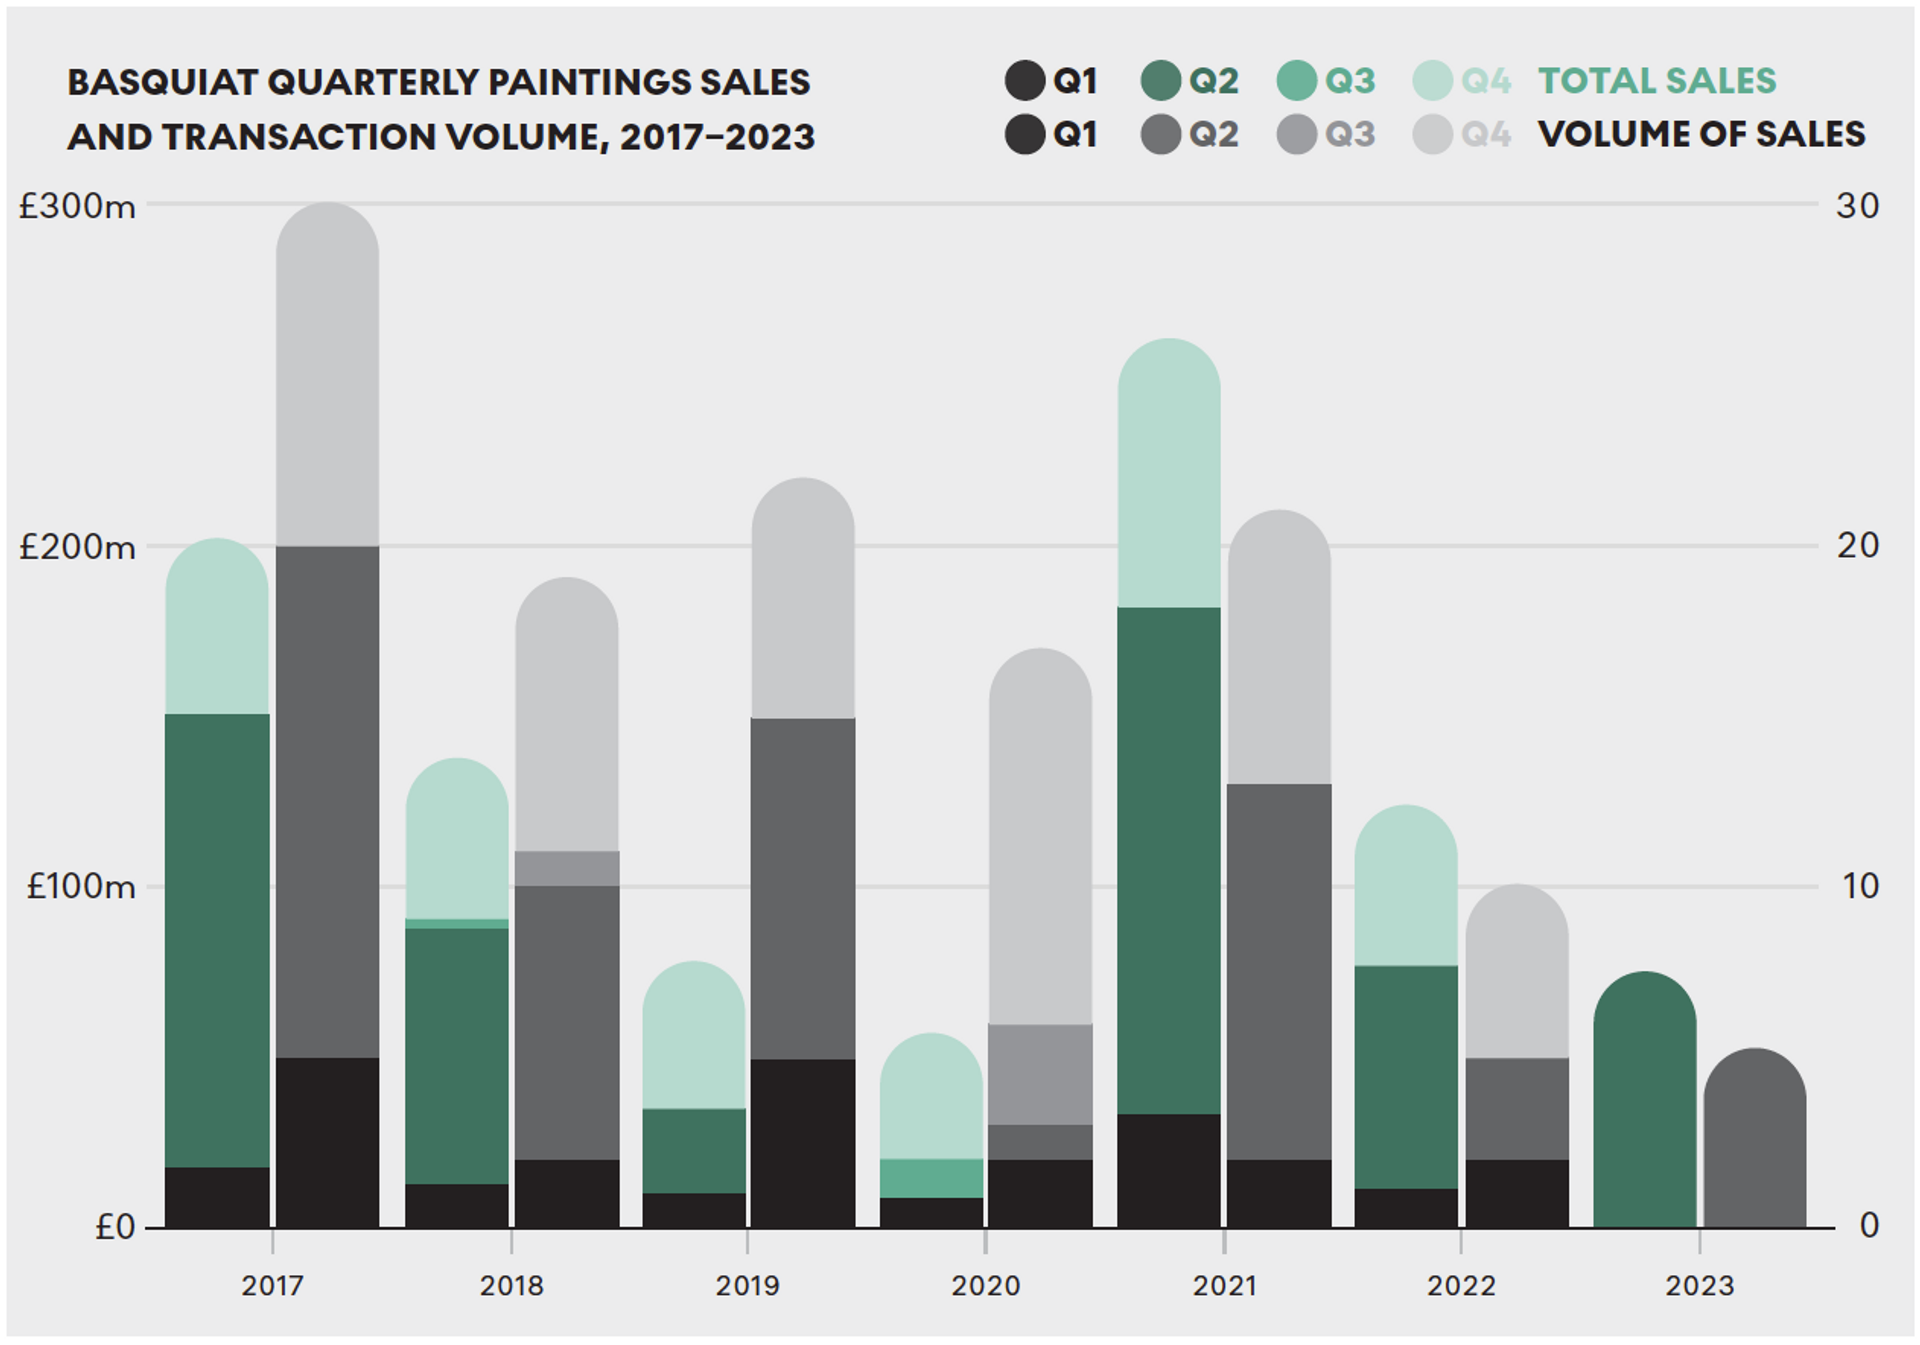 A stacked bar graph of Jean-Michel Basquiat's quaterly paintings sales and transaction volume over the five-year period from 2017 to 2023. 